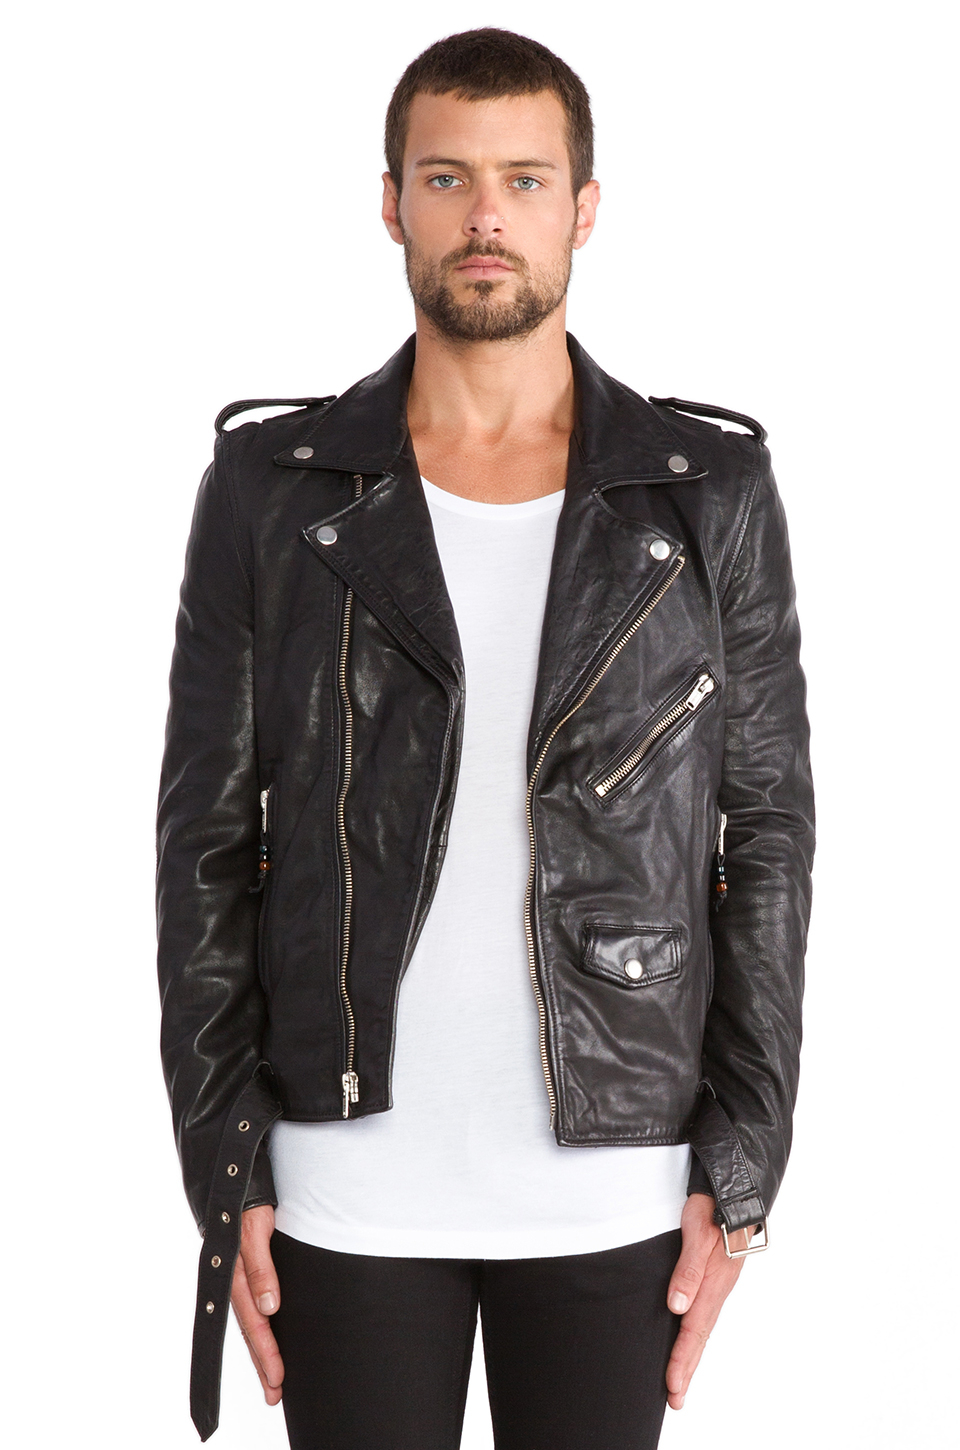 blk dnm leather jacket review